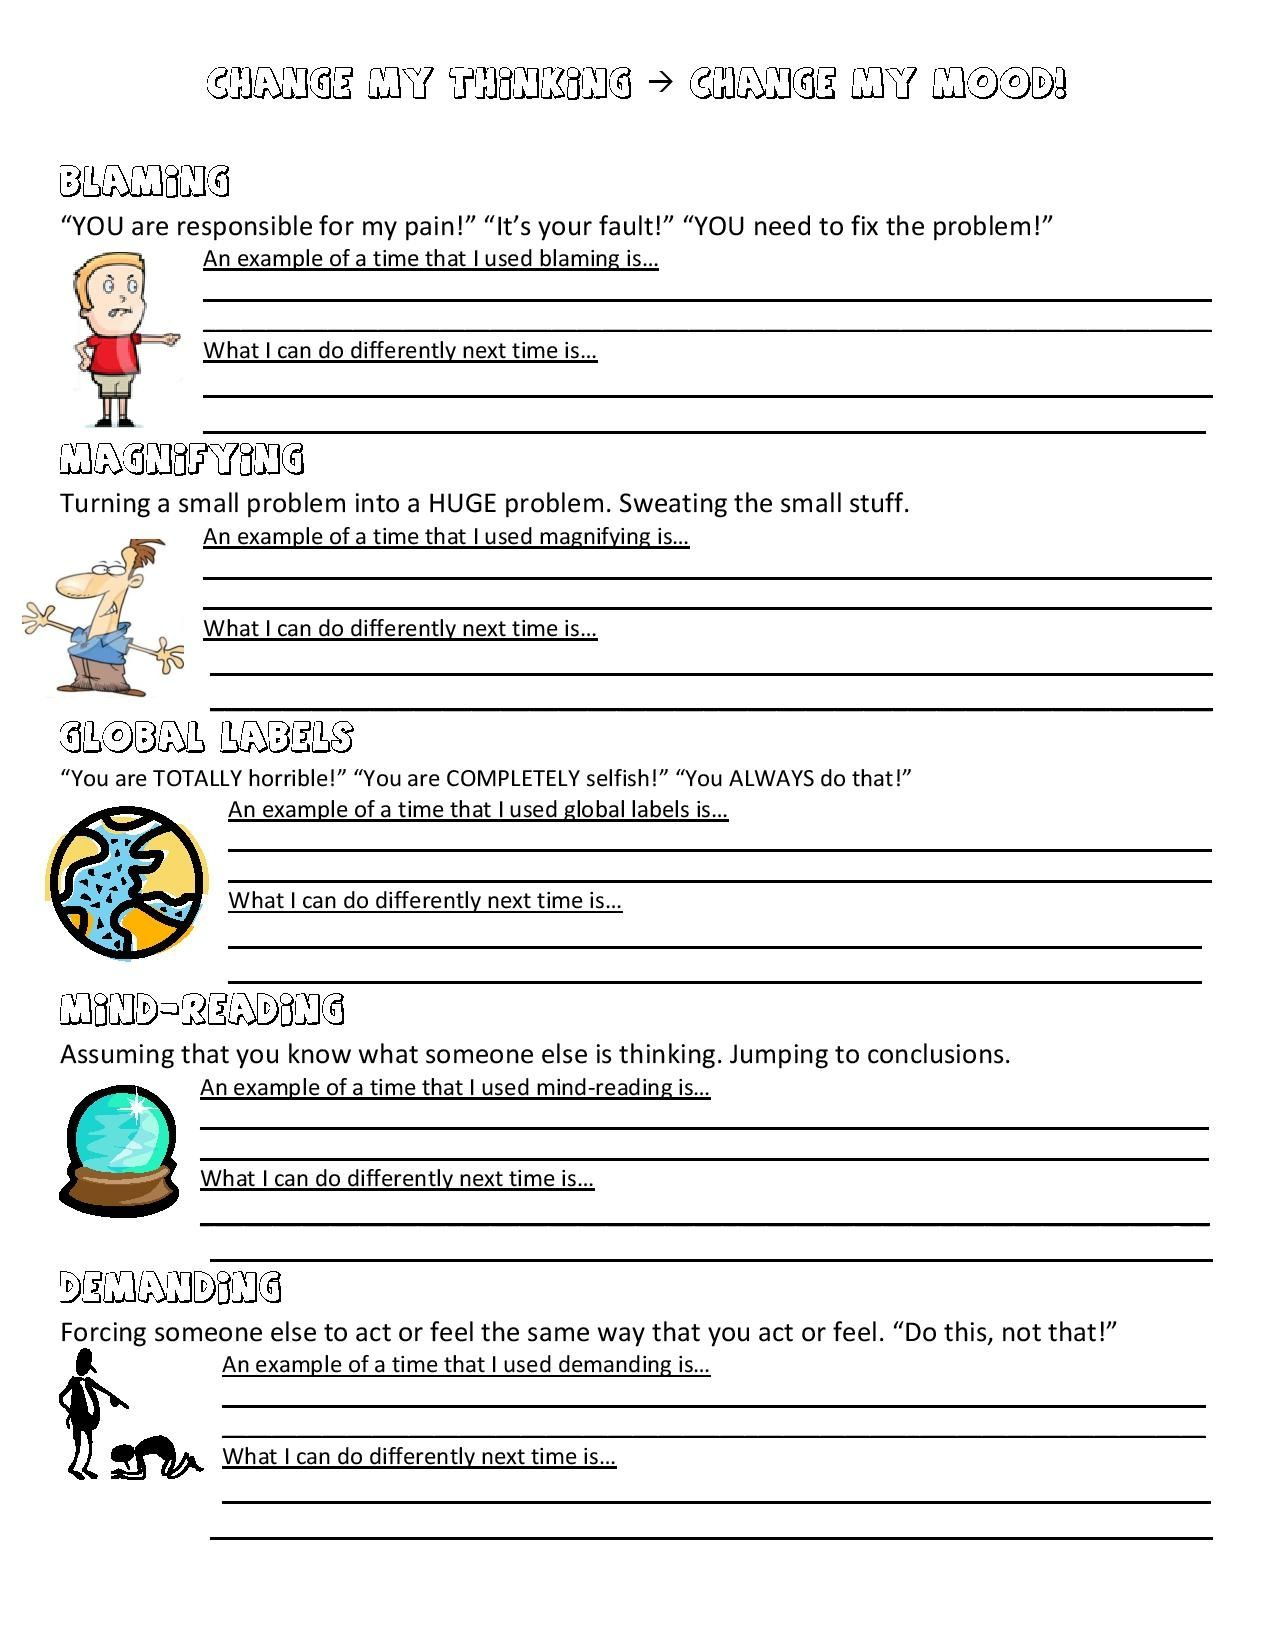 Free Printable Worksheets For Anger And Anxiety For Kids